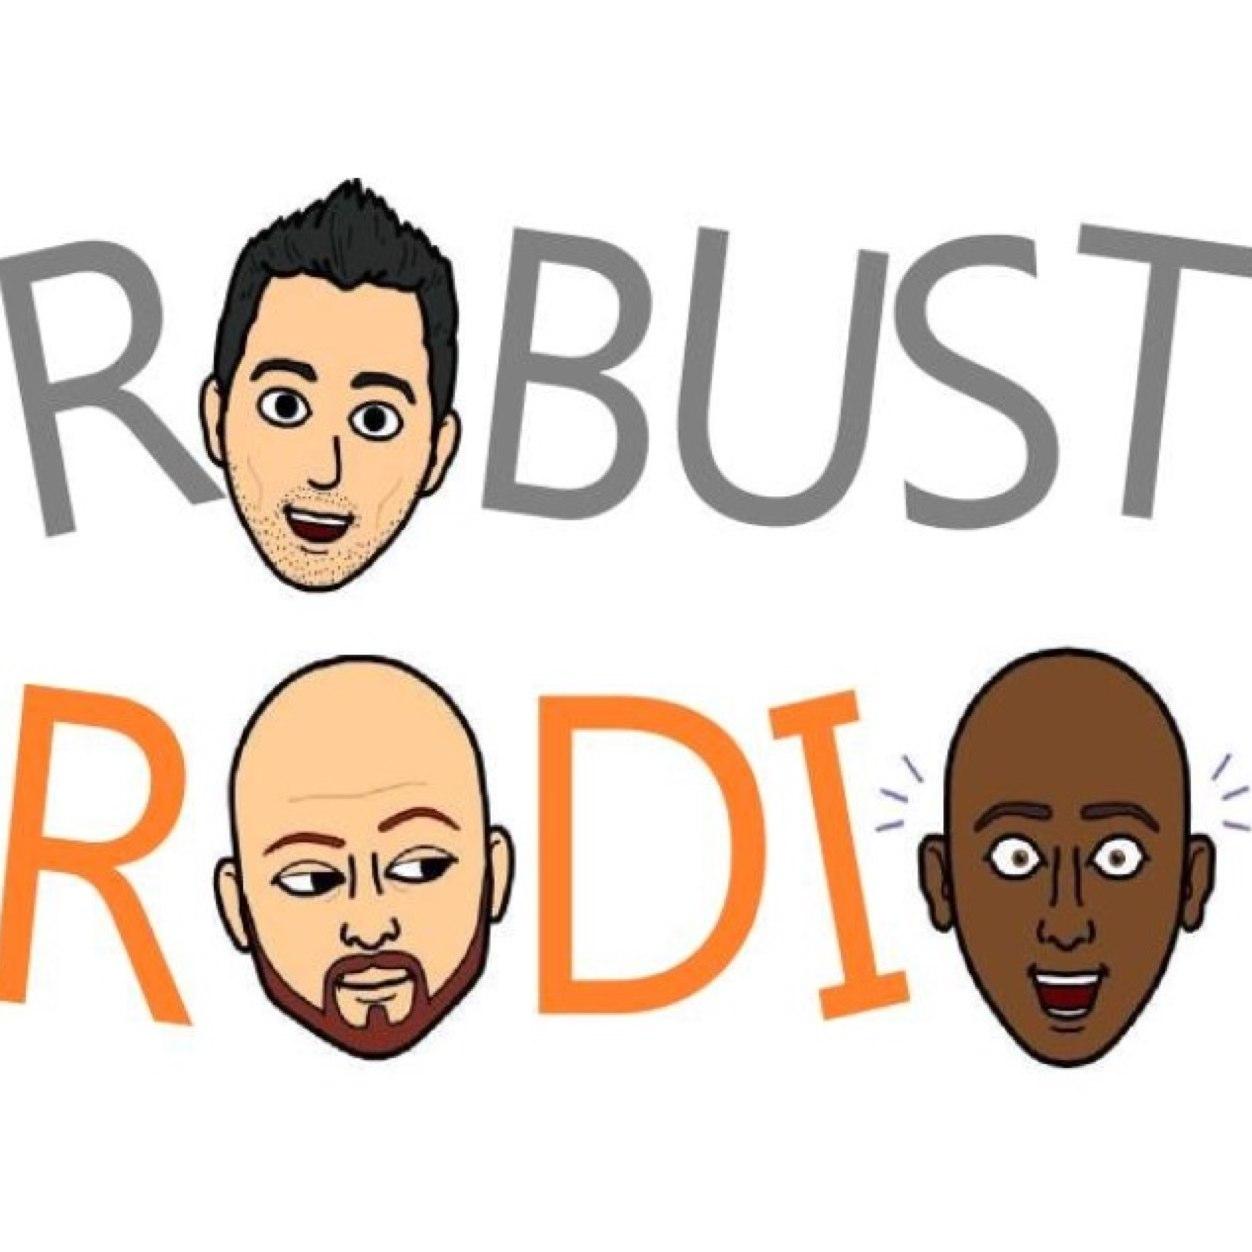 Official Twitter account of Robust Radio, a weekly podcast about games, sports, entertainment, and tech. Part of the Guardian Radio Network